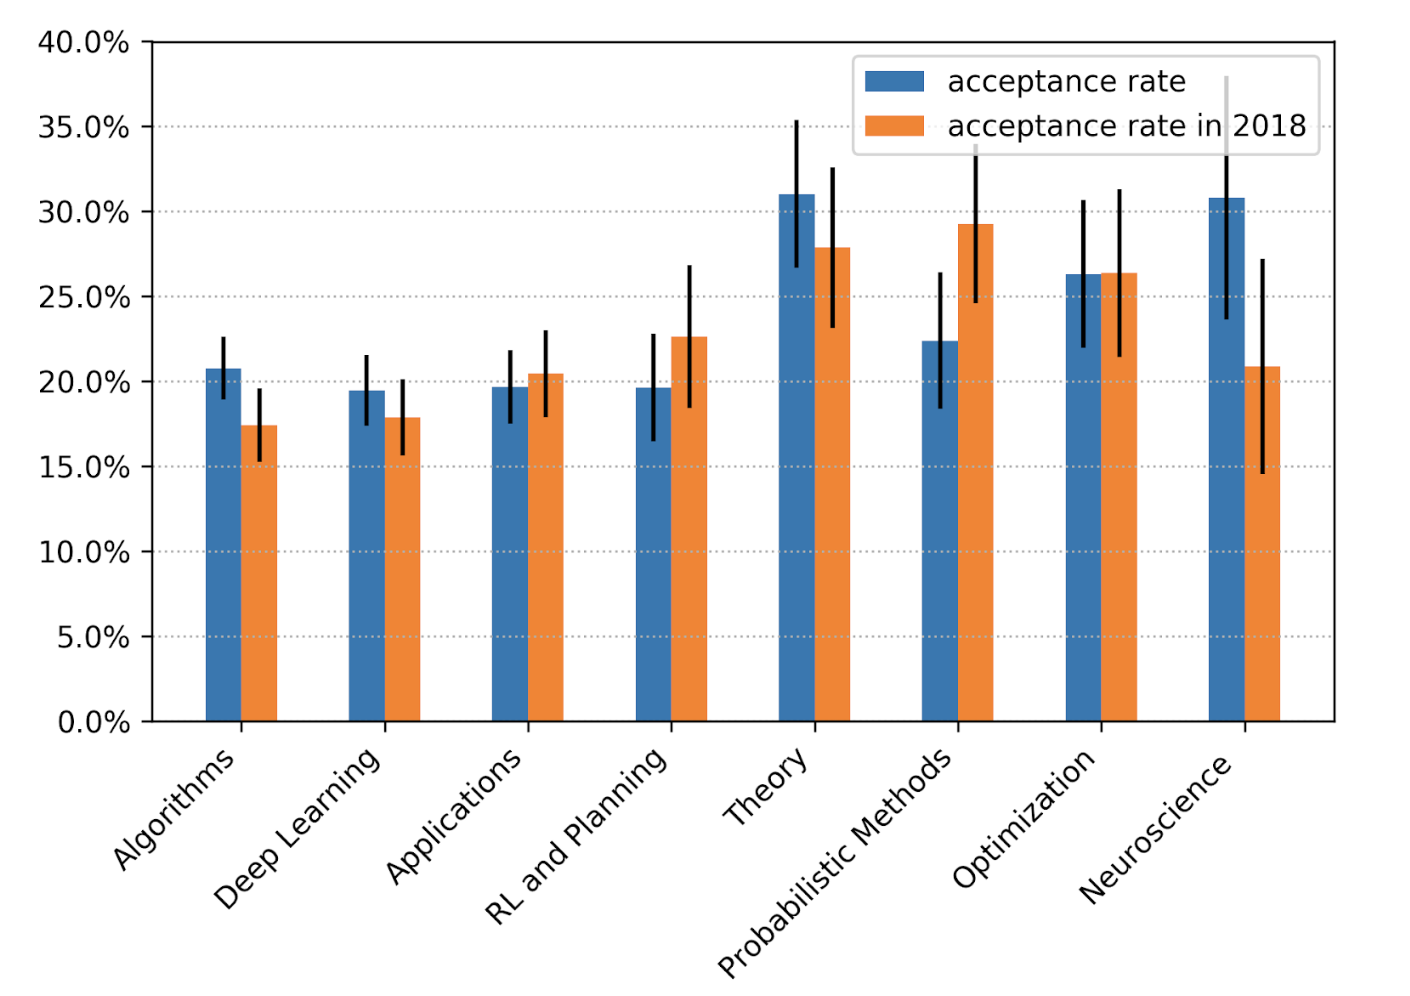 Neuroscience is the category with the highest acceptance rate